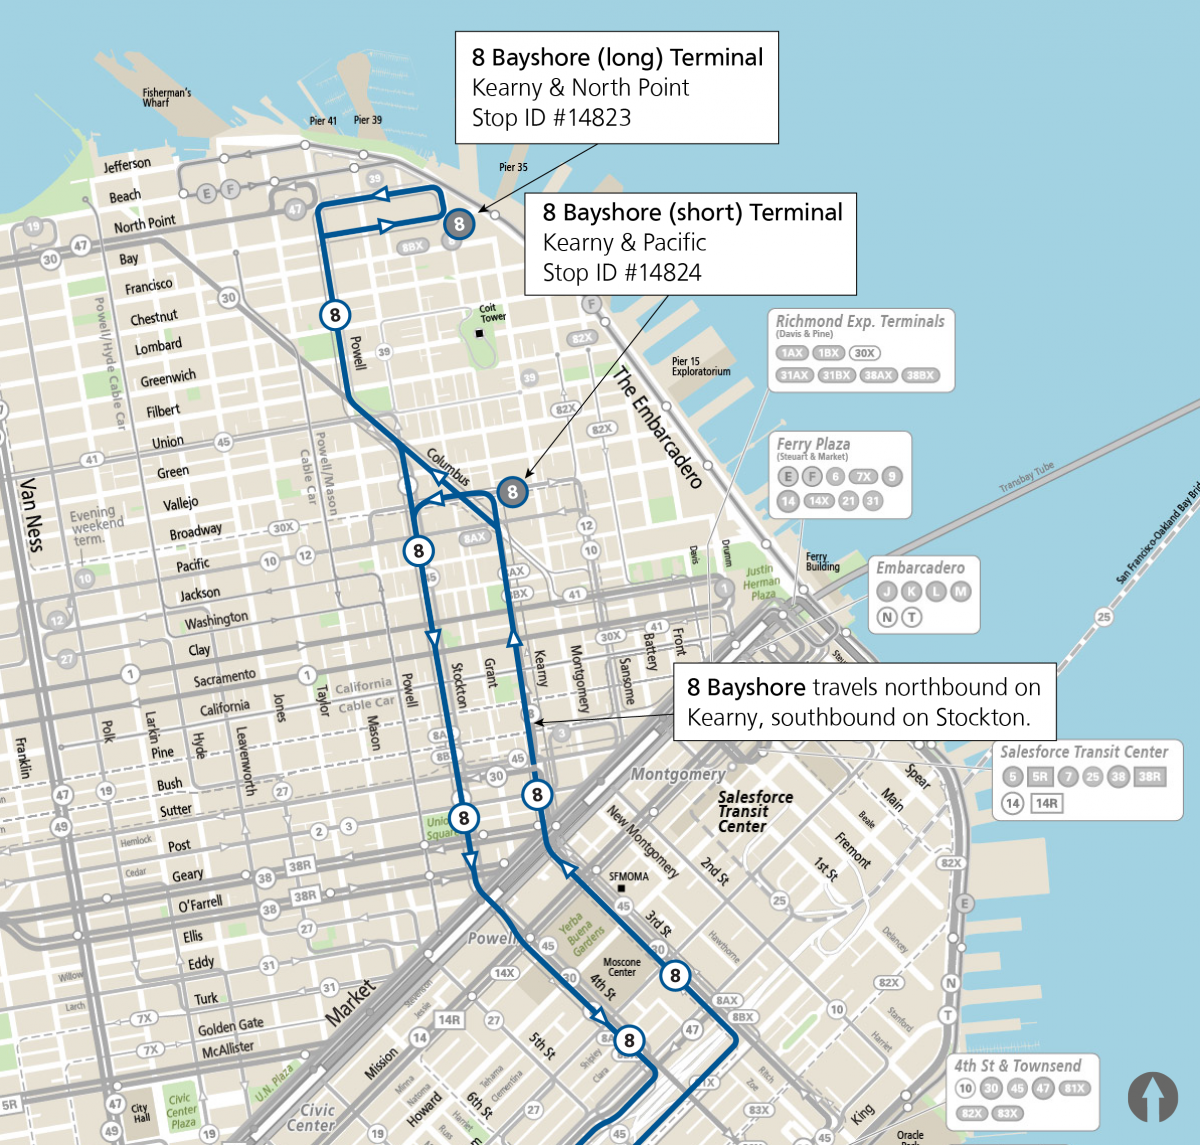 Map of 8 Bayshore in the Financial District, Chinatown, and North Beach, highlighting the northbound route along Kearny and the two terminals at Kearny & Pacific and at Kearny & North Point